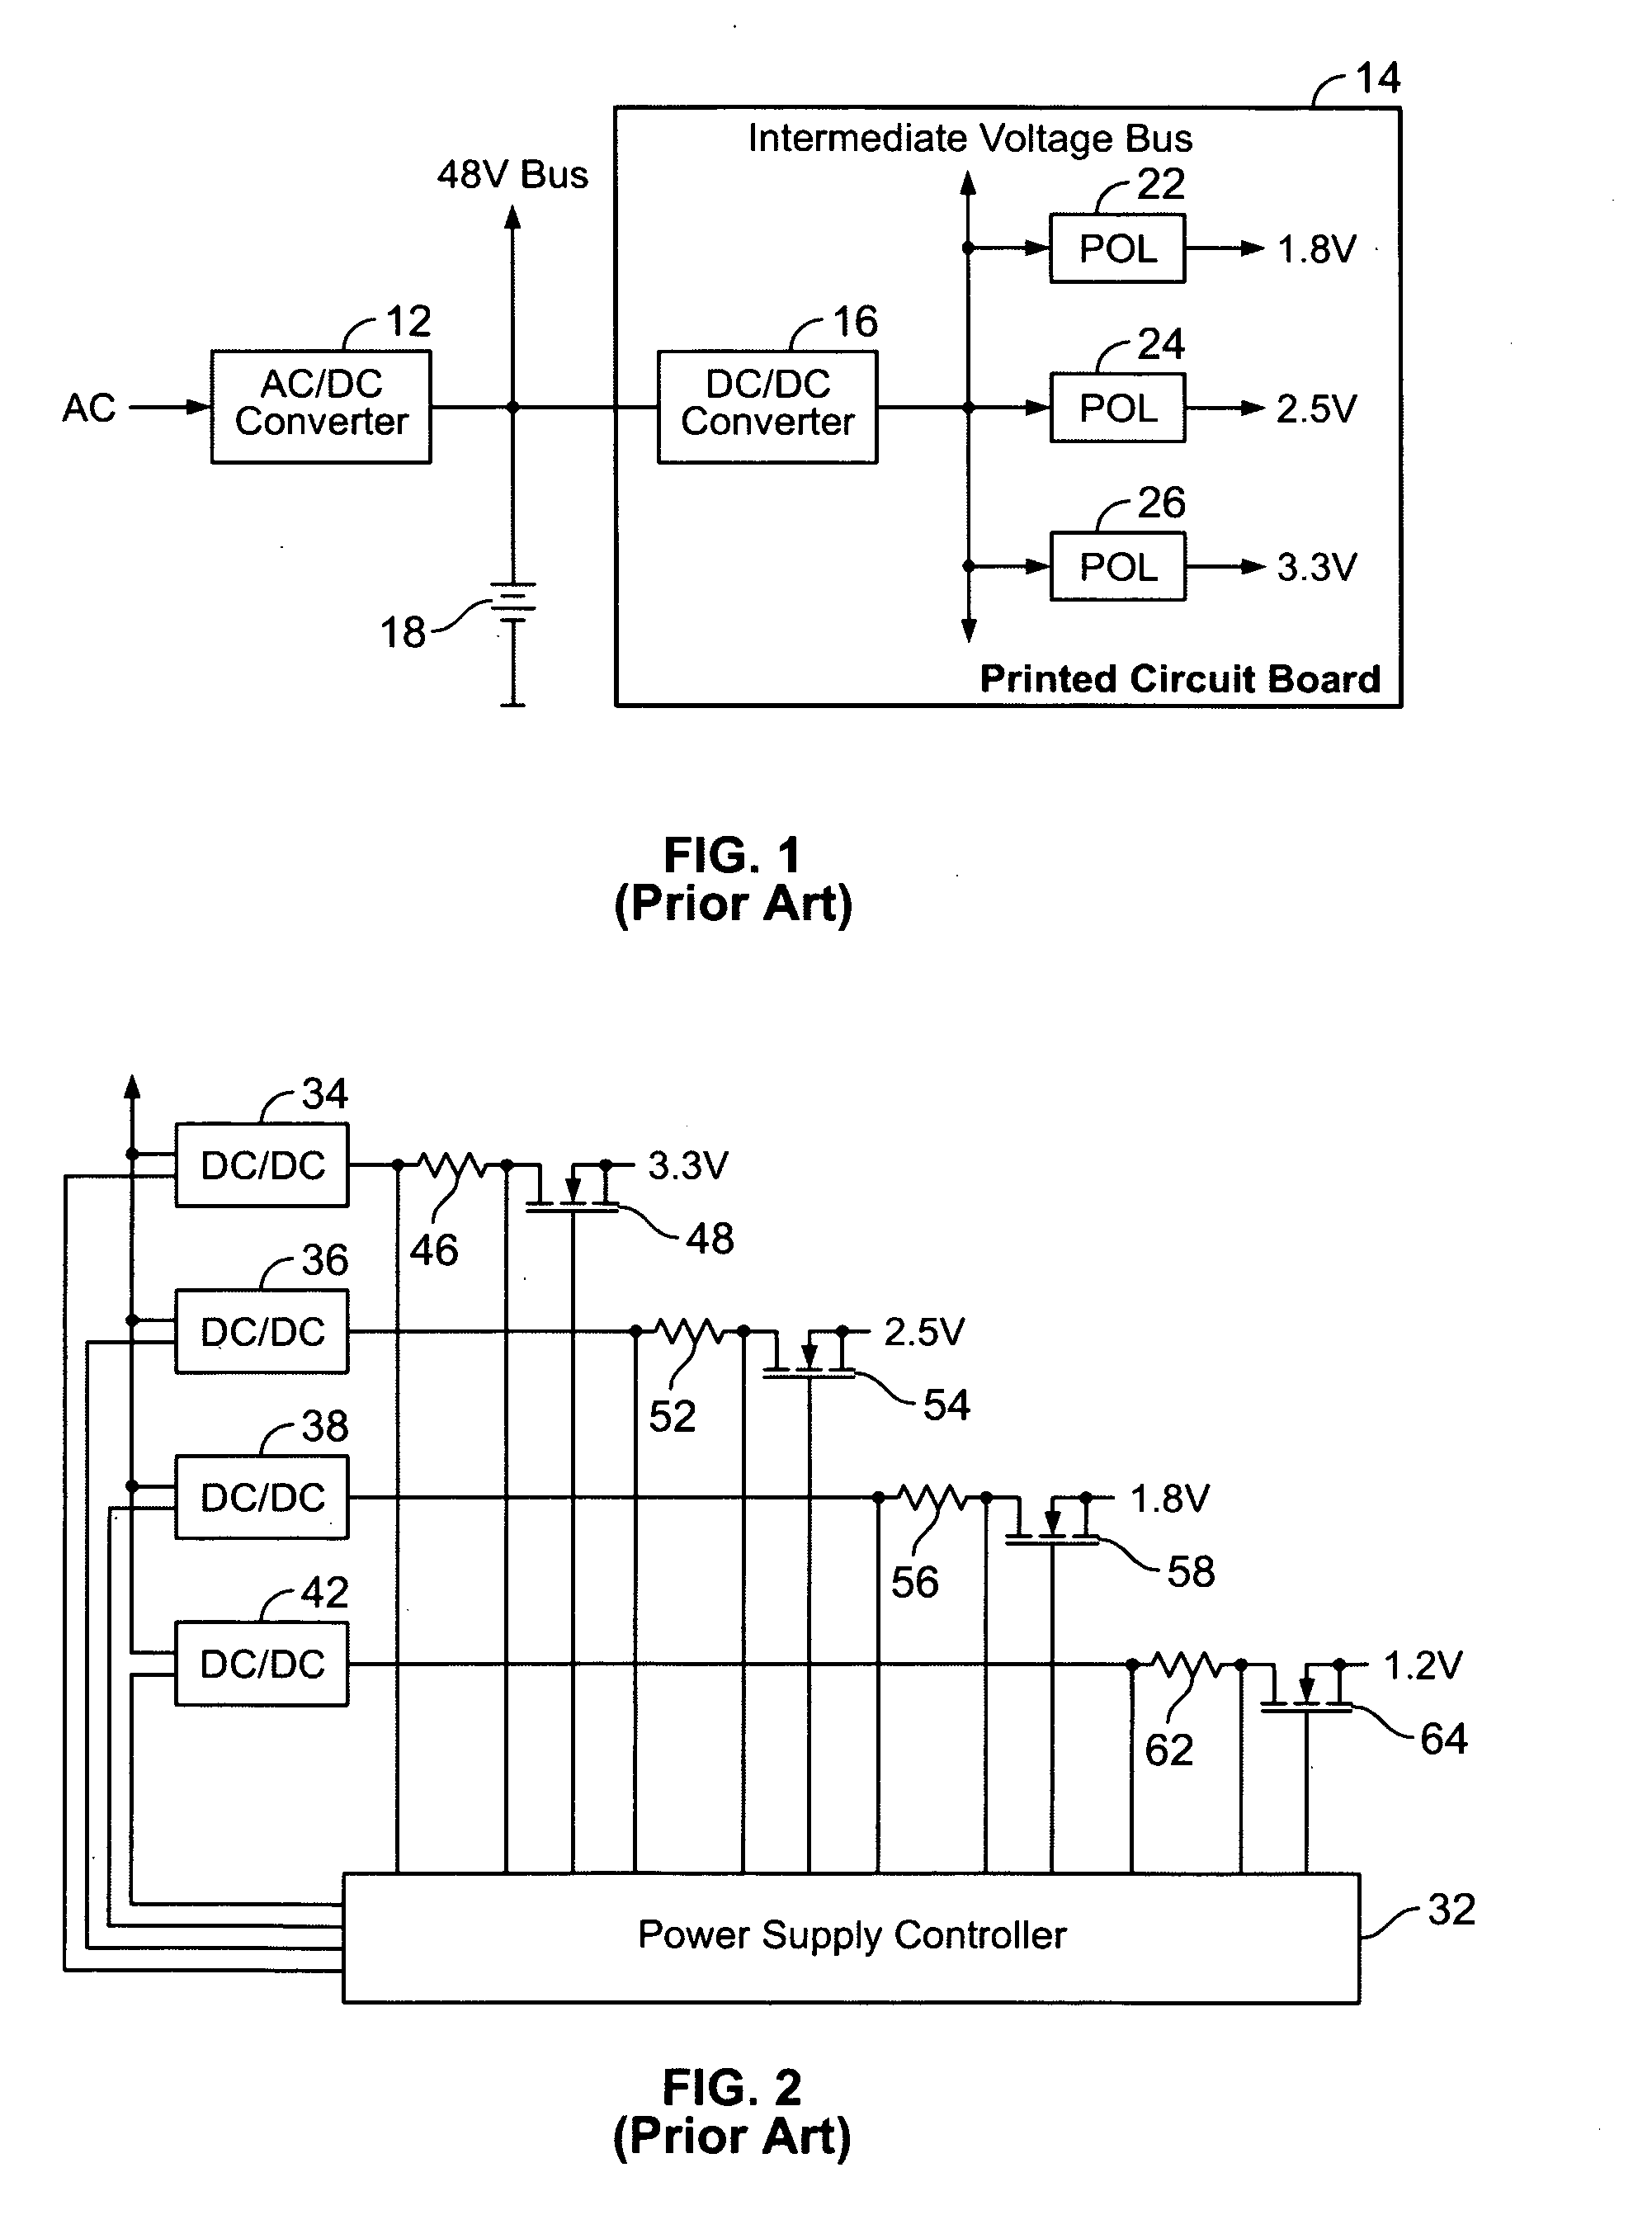 Method and system for controlling and monitoring an array of point-of-load regulators